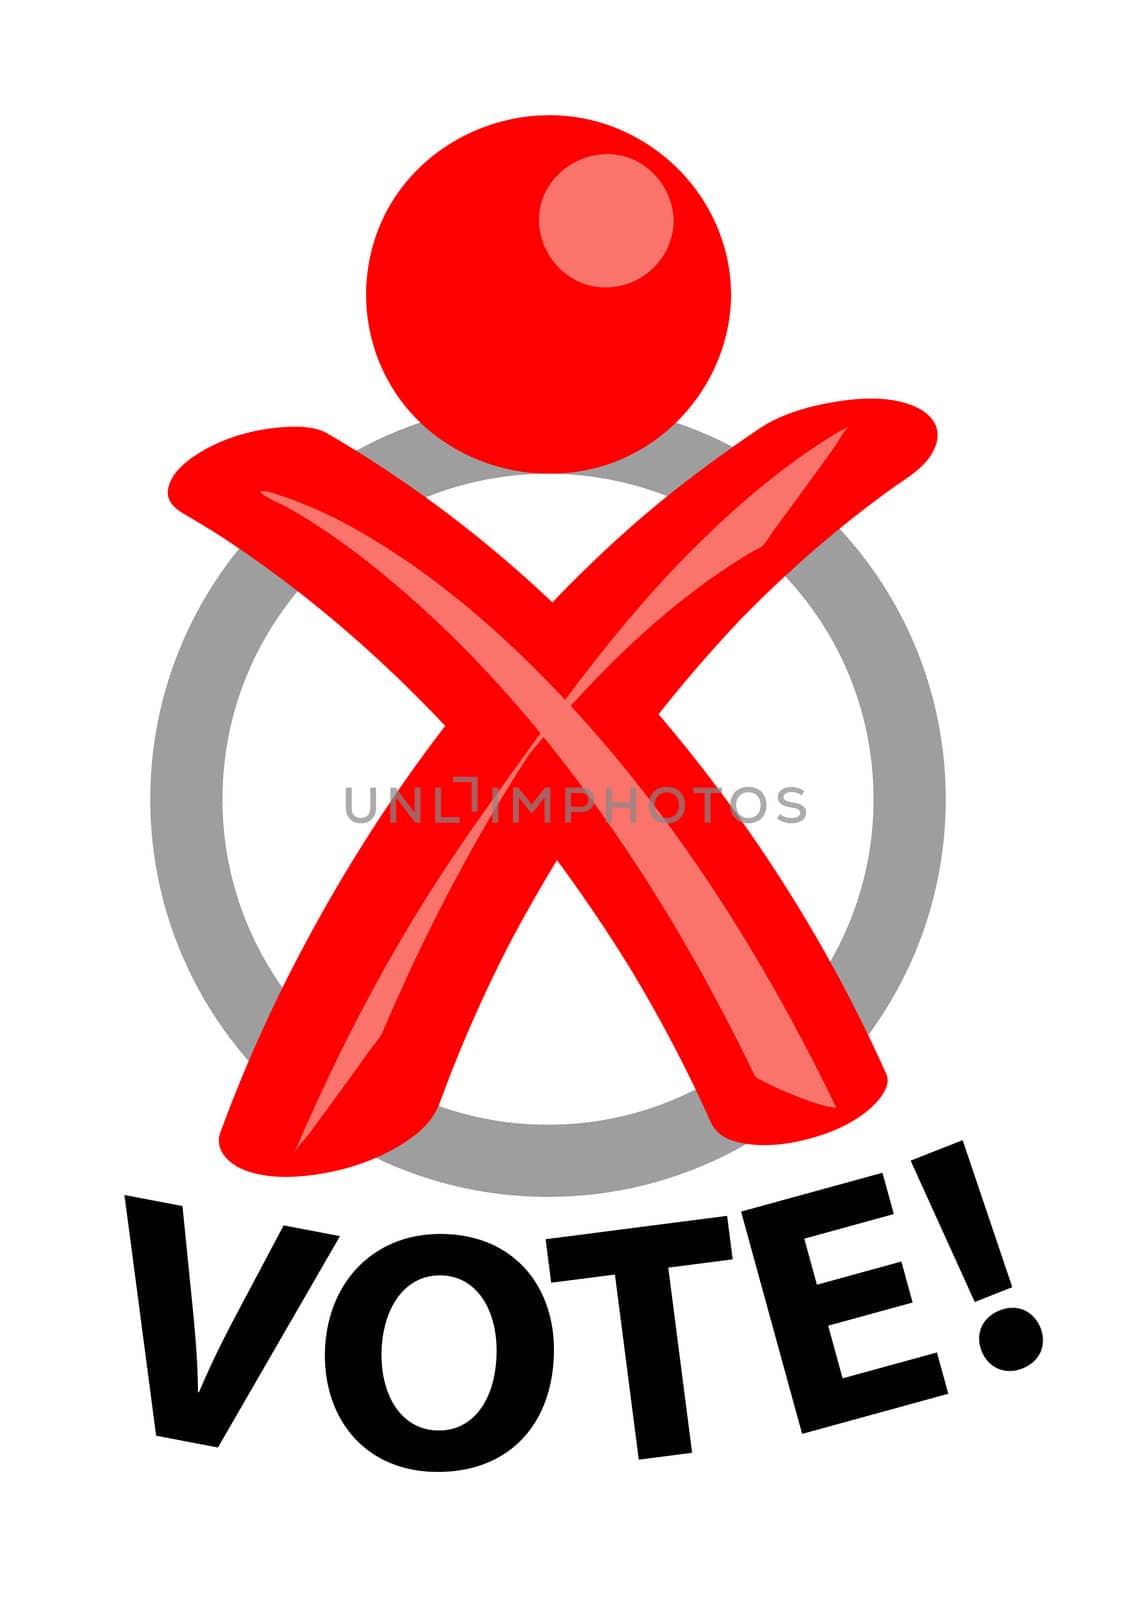 A stylized person out of a cross like on a ballot. All isolated on white background.